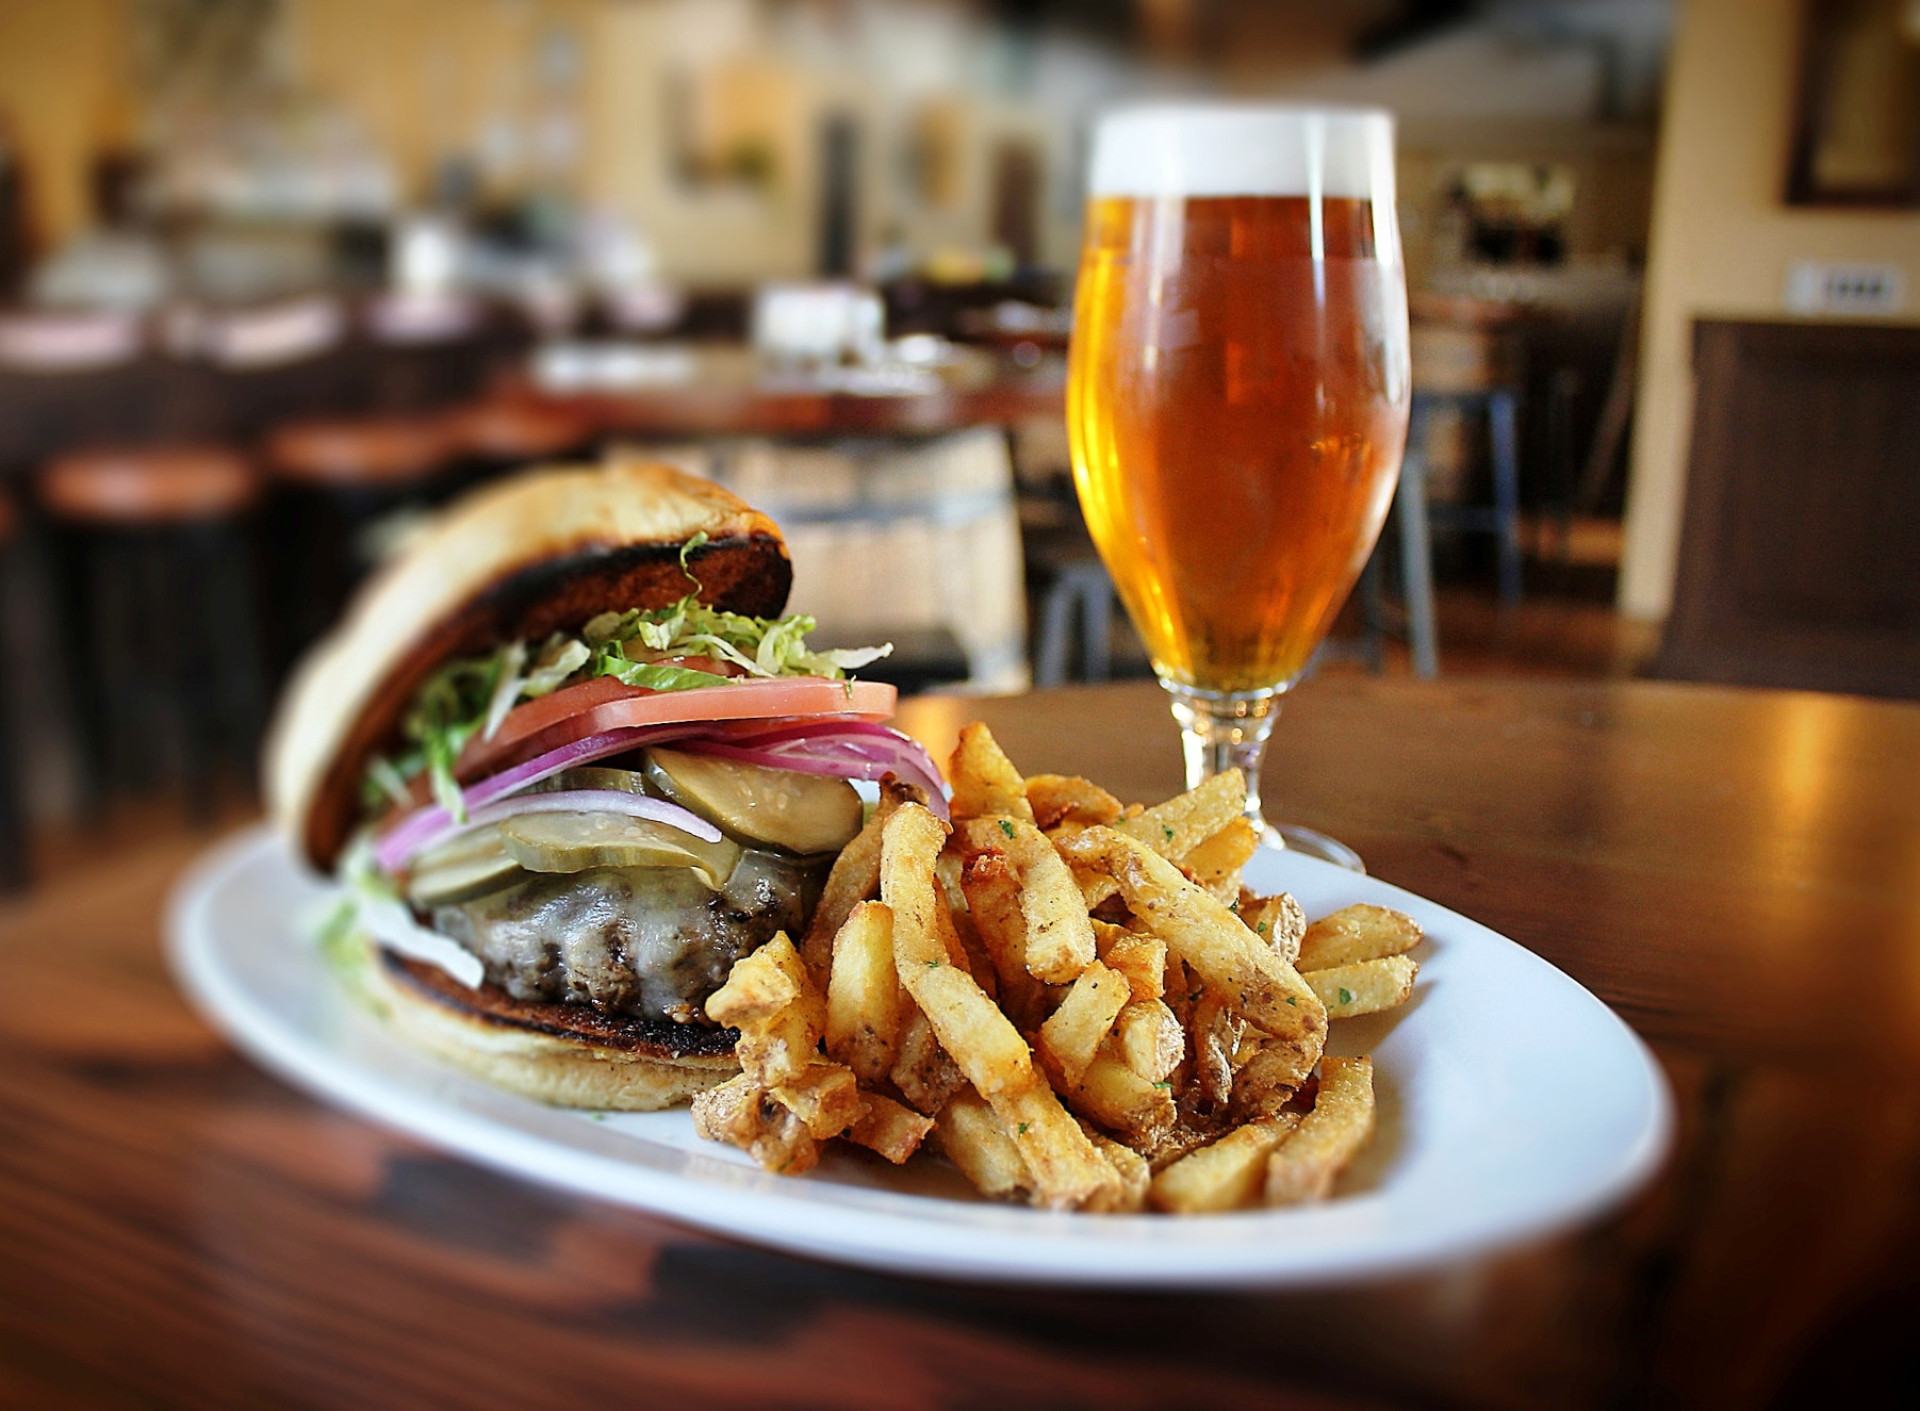 Visit Wascana Park and stop at the Bushwakker Brewpub for Canadian twists on pub classics like wild boar burgers, bison meatloaf, the Saskatchewan Hot Plate, and an enormous selection of beer.<p>You may also like:<a href="https://www.starsinsider.com/n/433756?utm_source=msn.com&utm_medium=display&utm_campaign=referral_description&utm_content=384585v6en-us"> Imposter syndrome and the famous people who suffer from it</a></p>